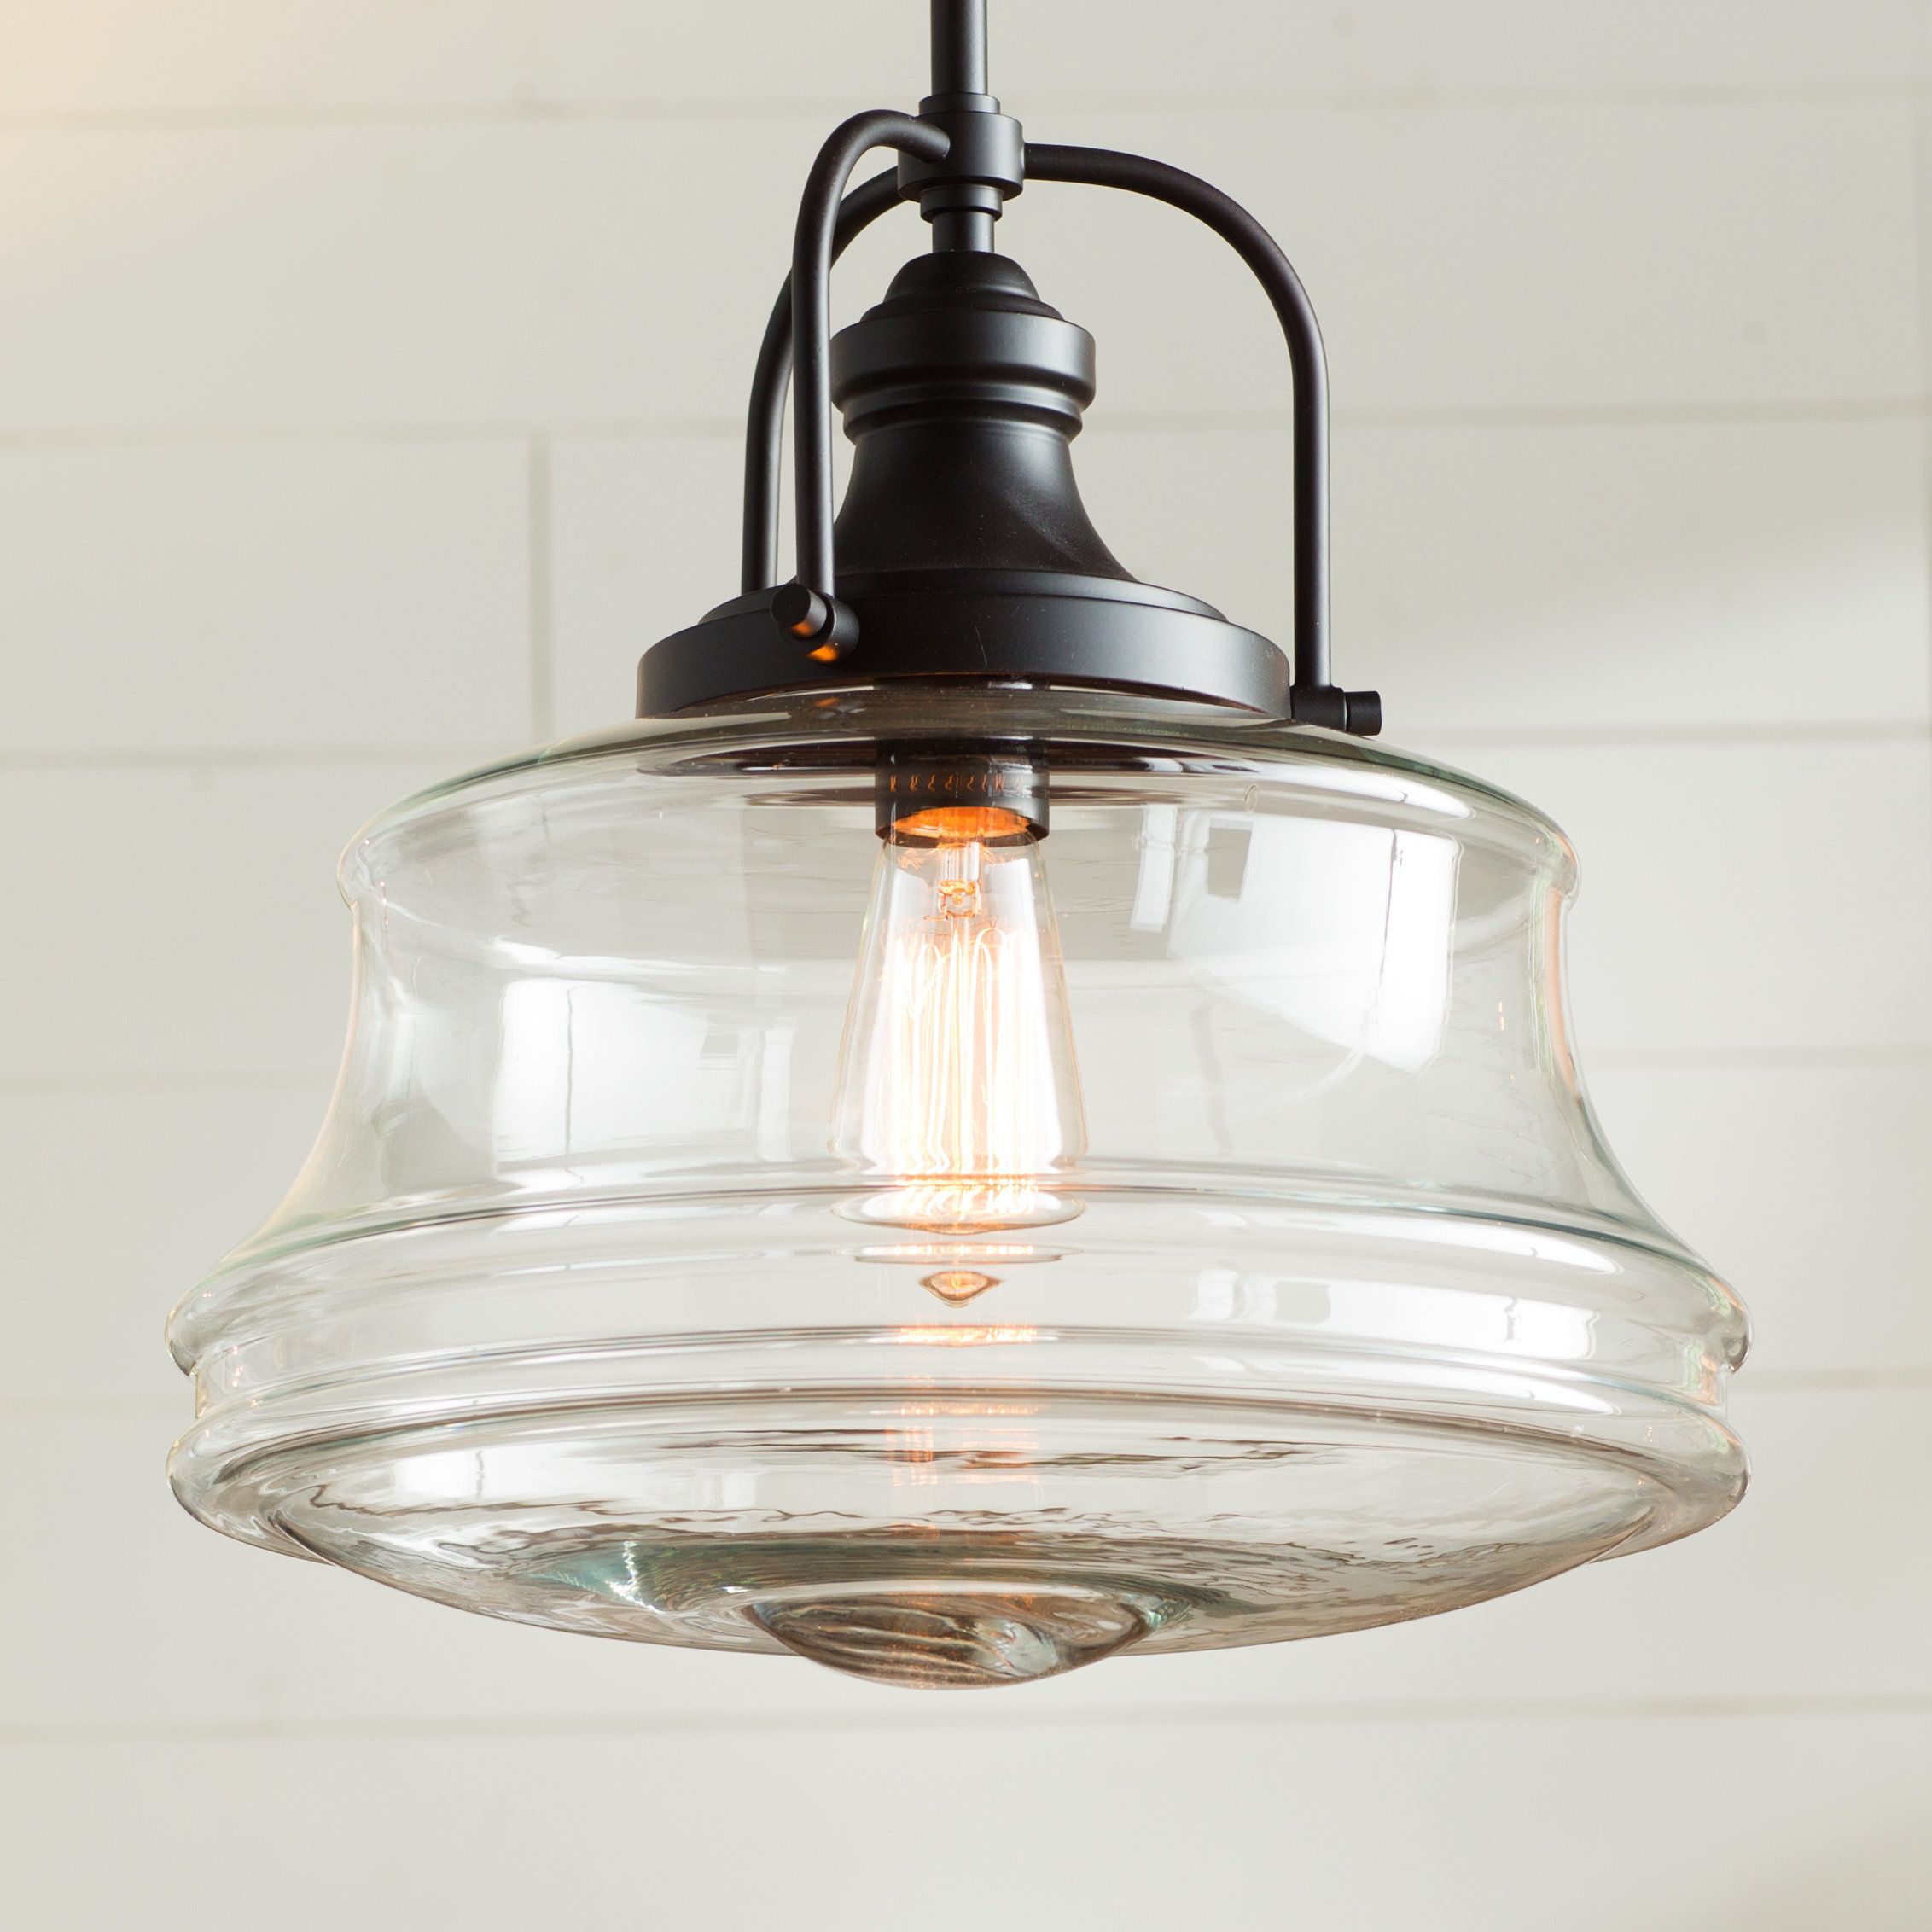 Nadine 1 Light Single Schoolhouse Pendant With Regard To Famous 1 Light Single Schoolhouse Pendants (View 4 of 25)